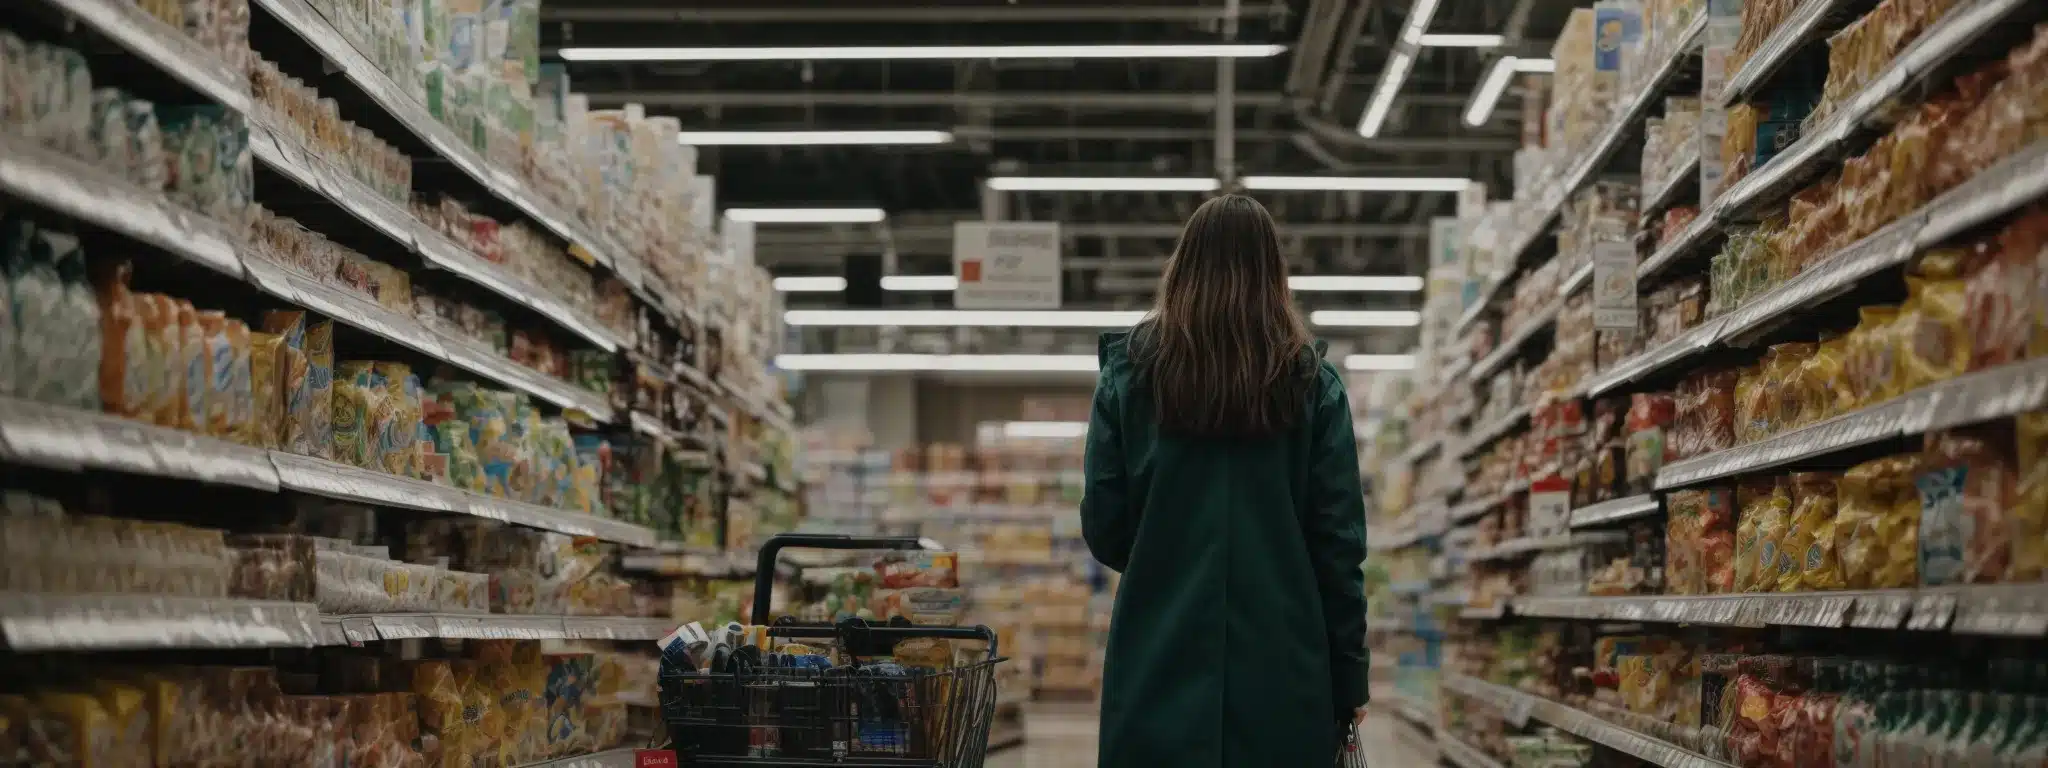 A Shopper Stands In An Aisle, Thoughtfully Examining Products On A Shelf, Symbolizing The Analysis Of Consumer Behavior Patterns.